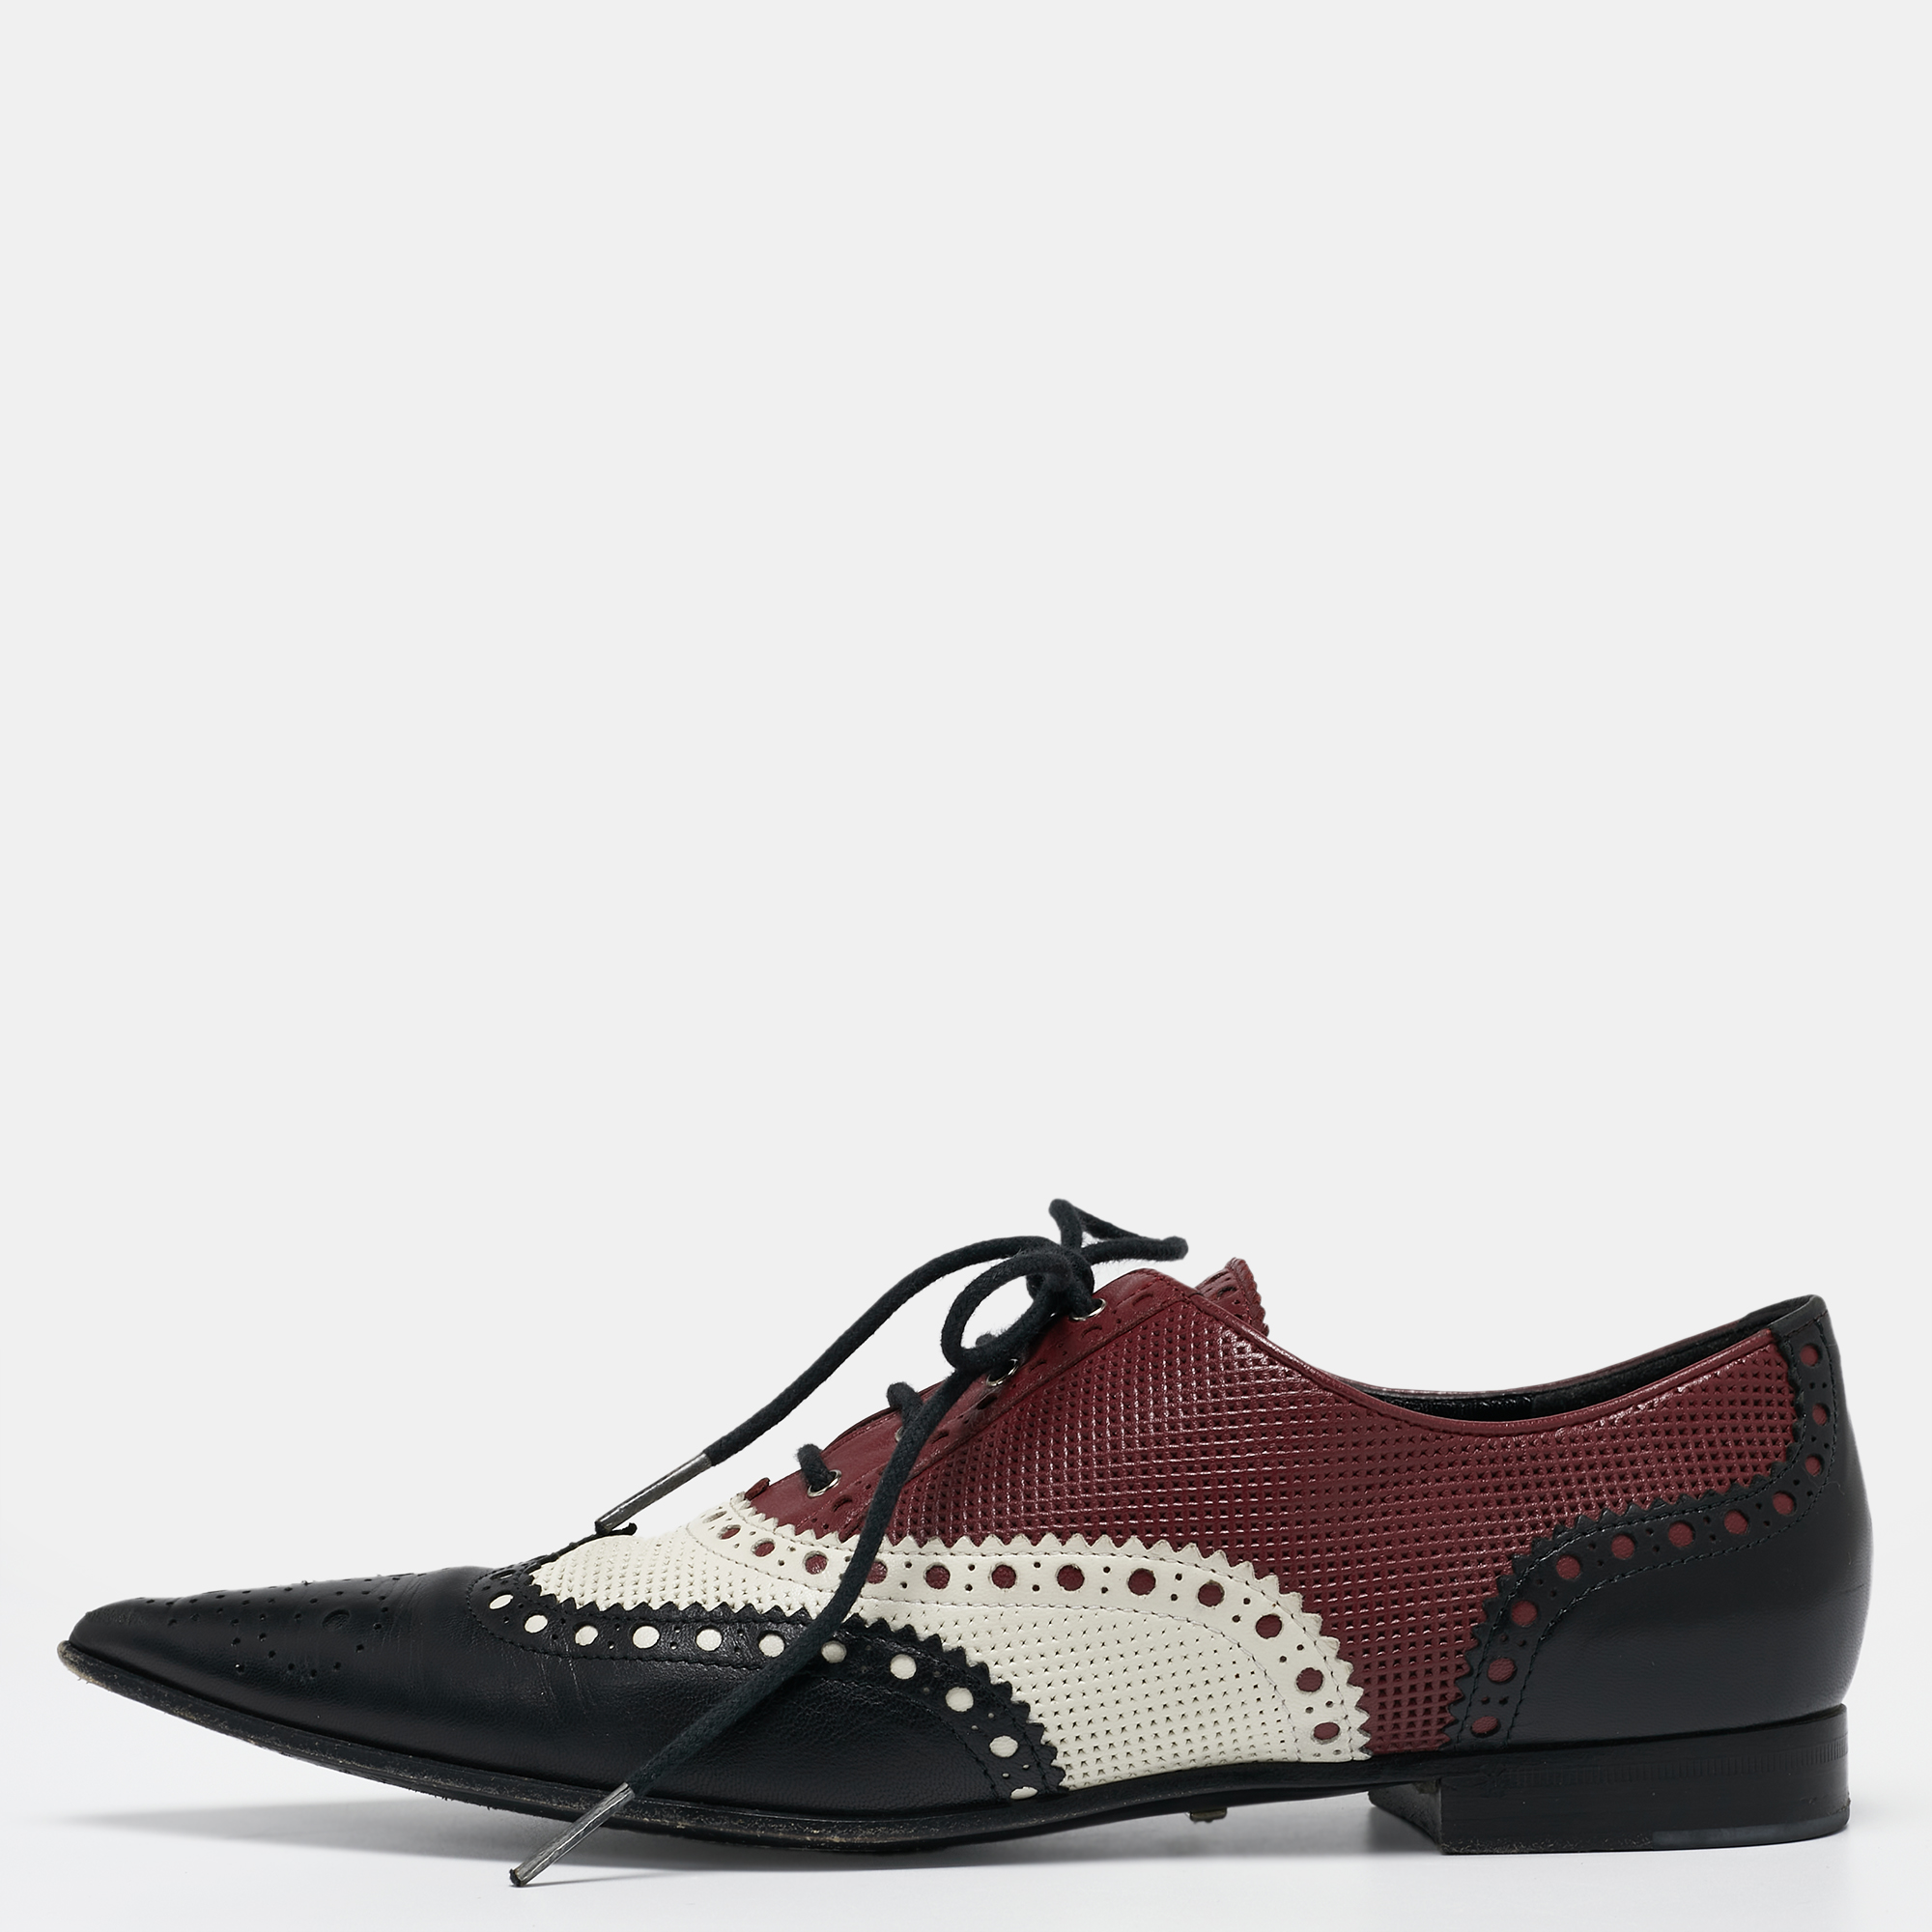 Gucci Multicolor Leather Pointed Toe Brogue Oxford Size 36